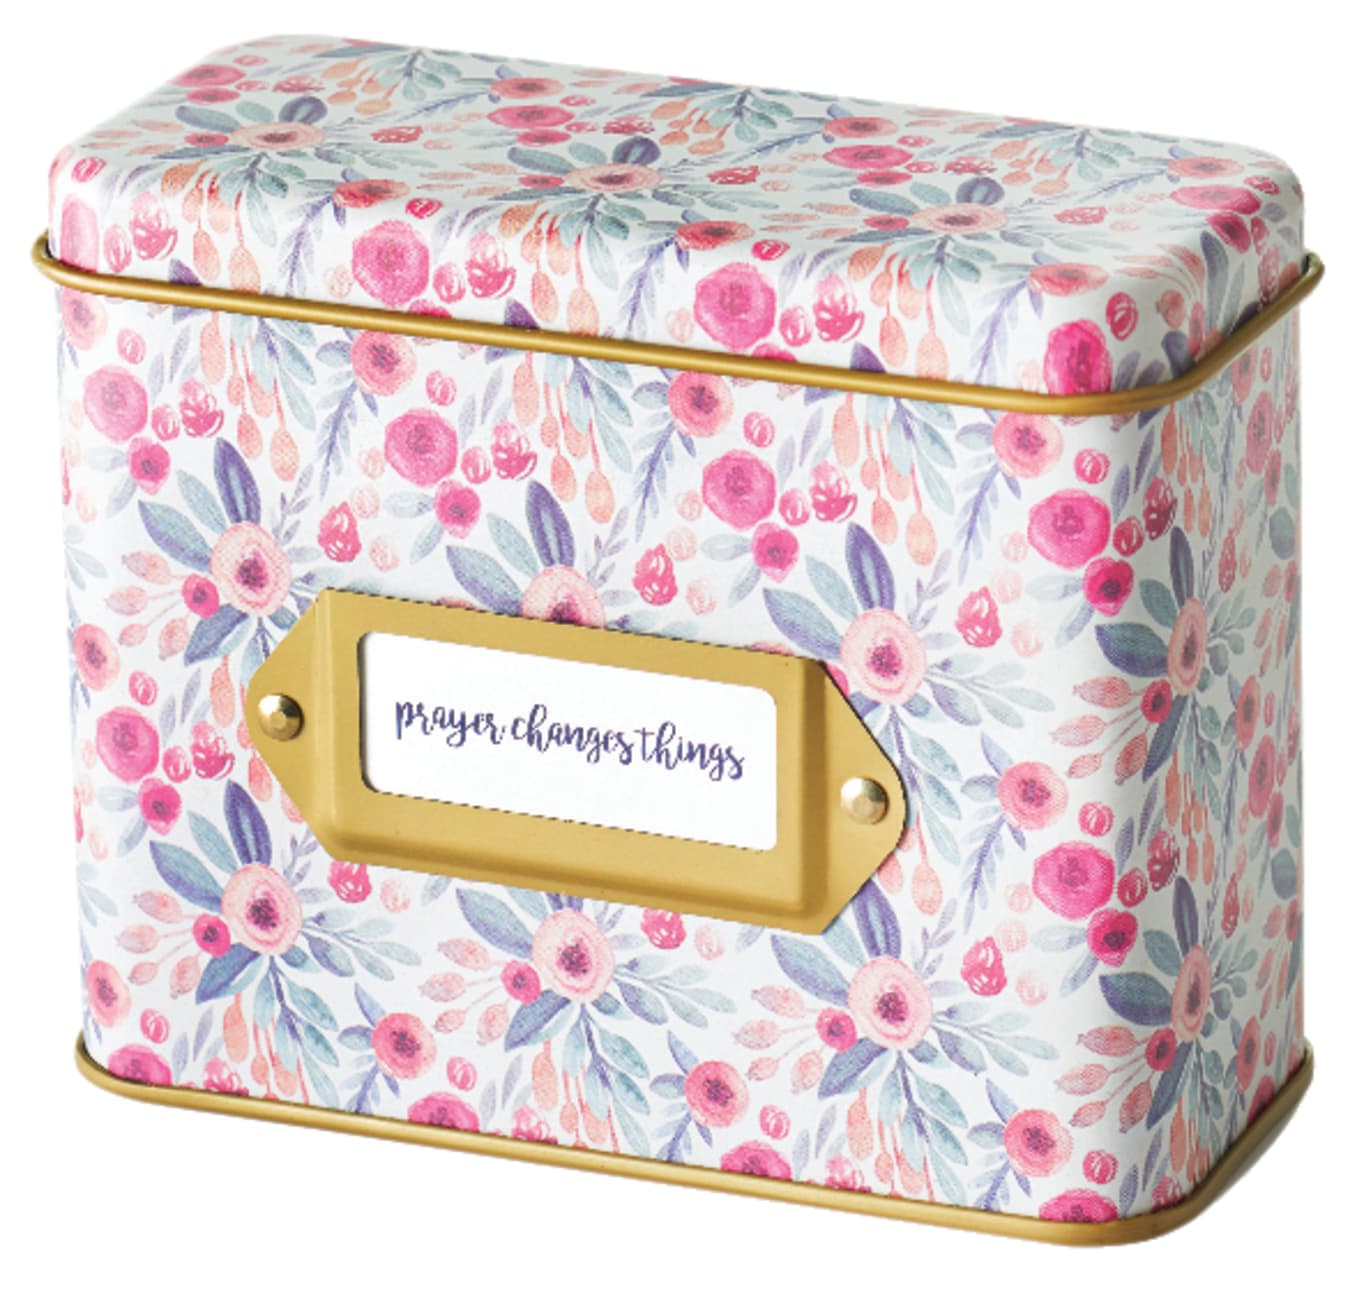 Prayer Cards in Tin Box: Prayer Changes Things, Floral Box